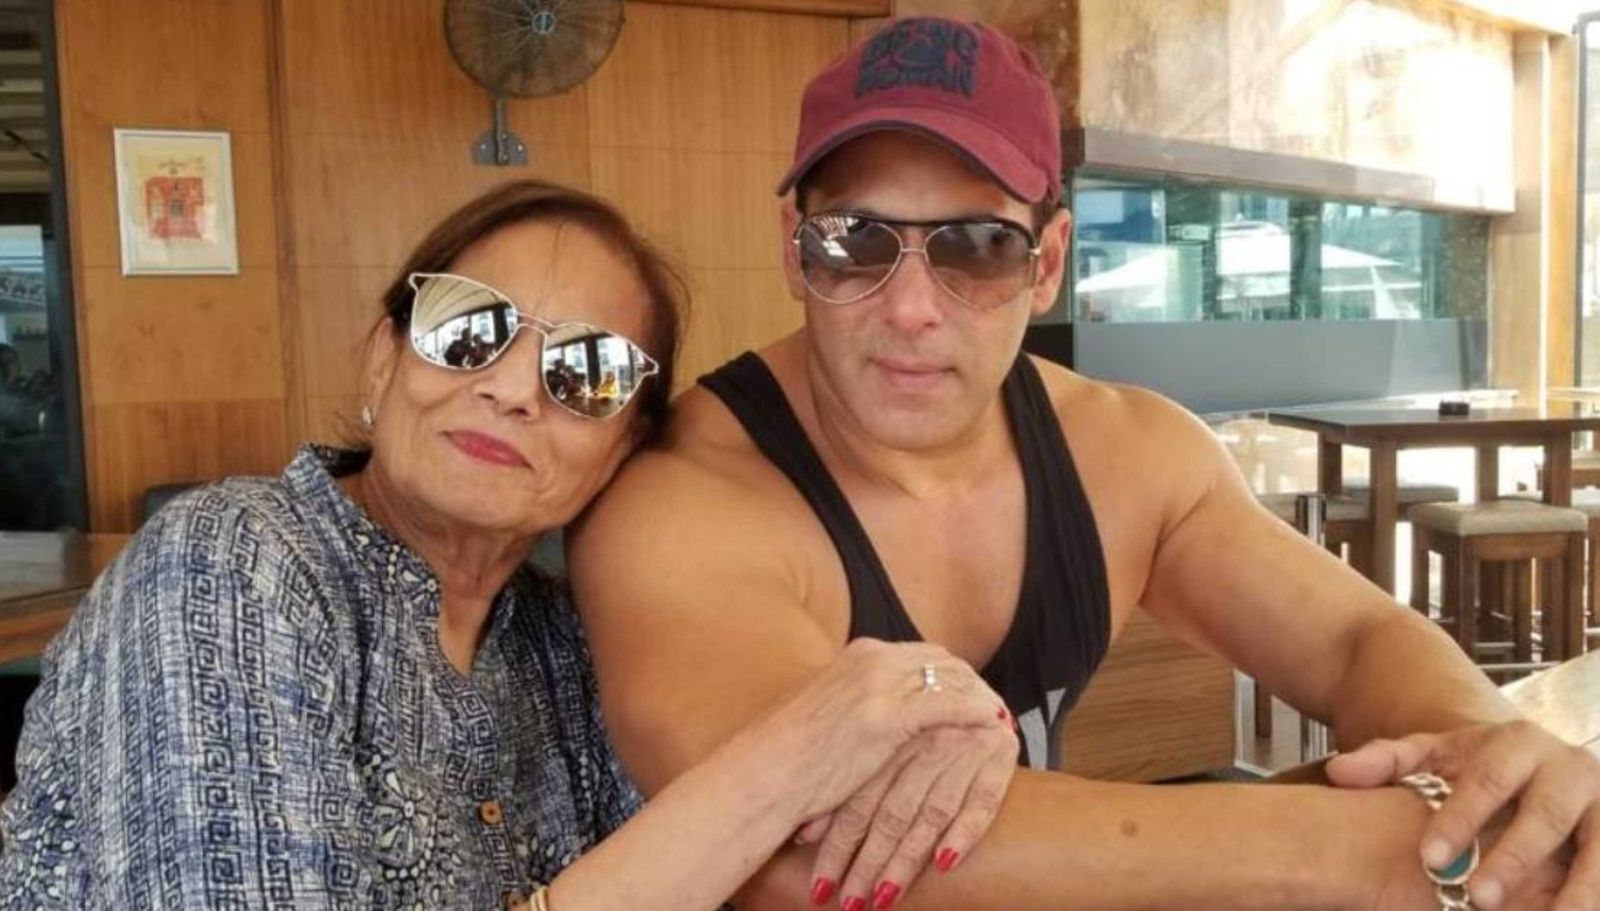 Salman Khan’s mother did not watch Bigg Boss 15 last year like many other fans; here’s why